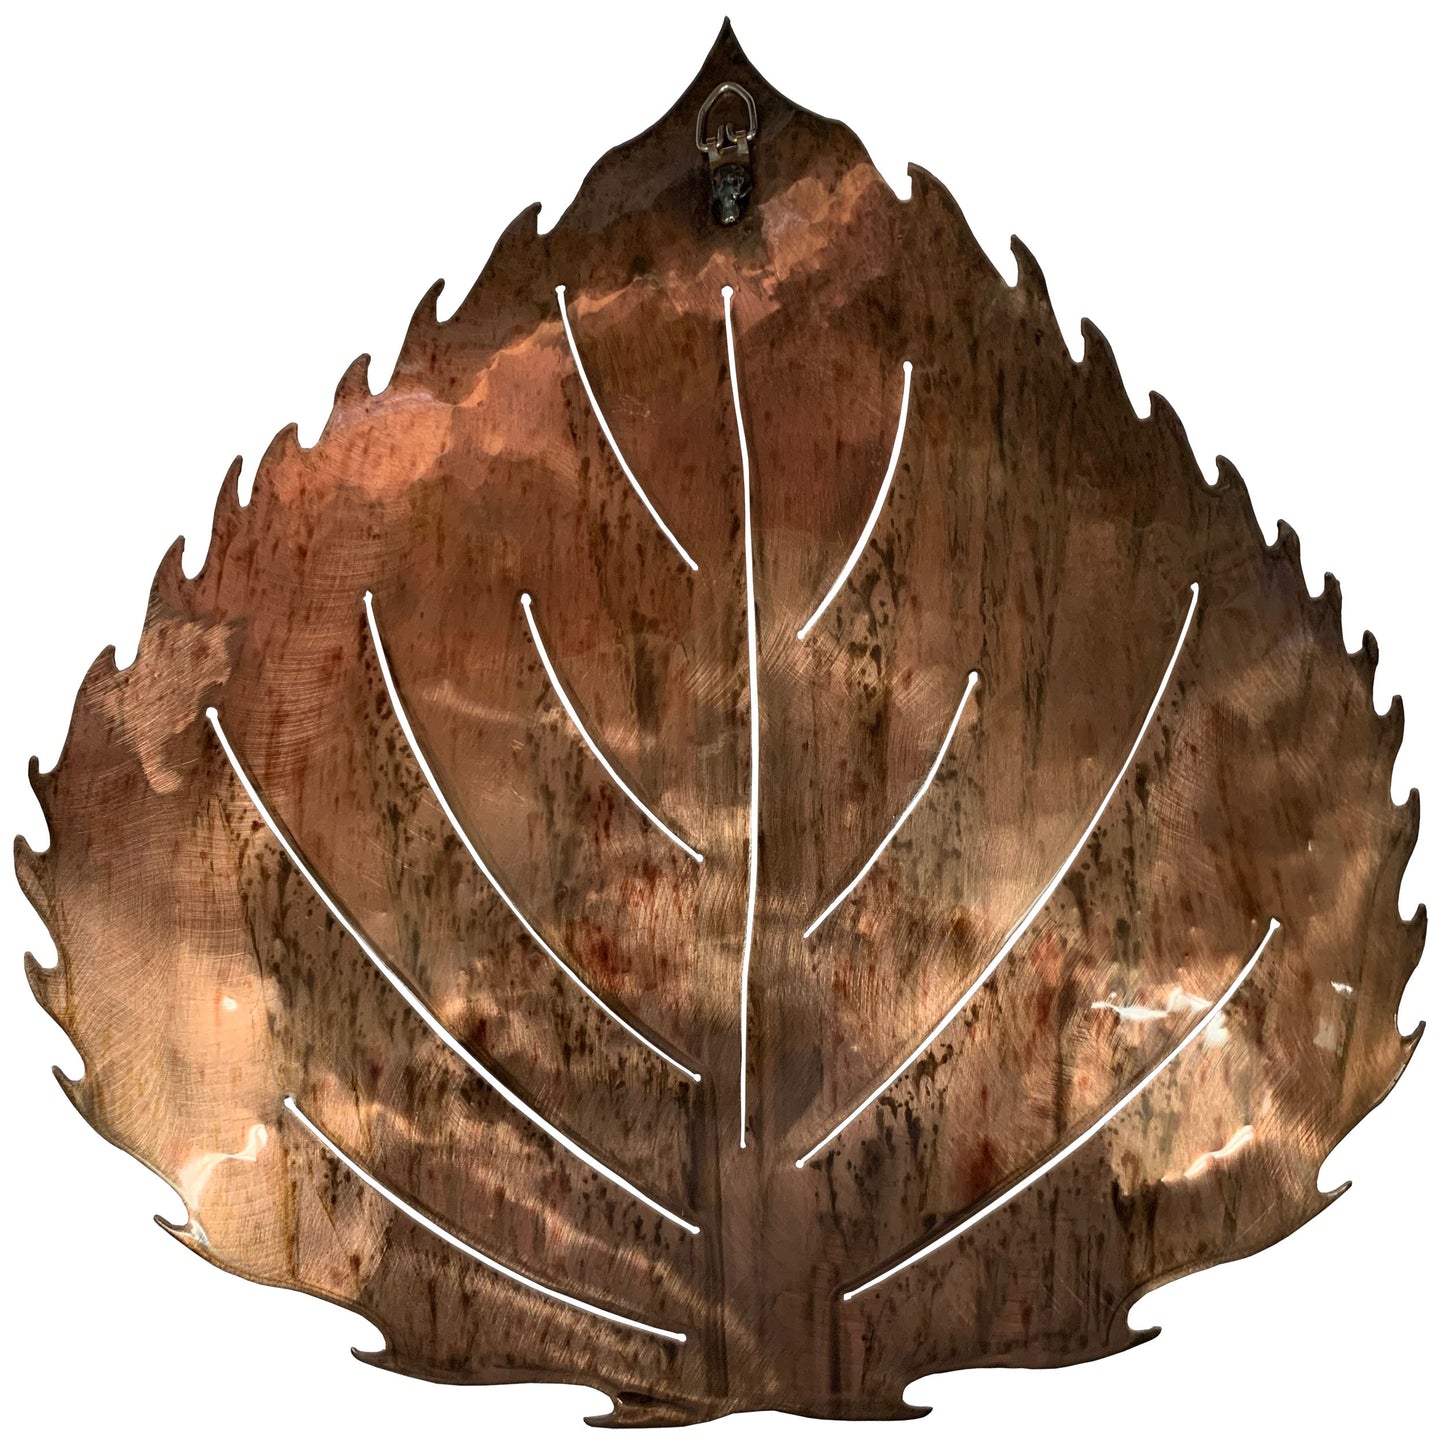 Leaf Sculpture Metal Wall or Table Decor